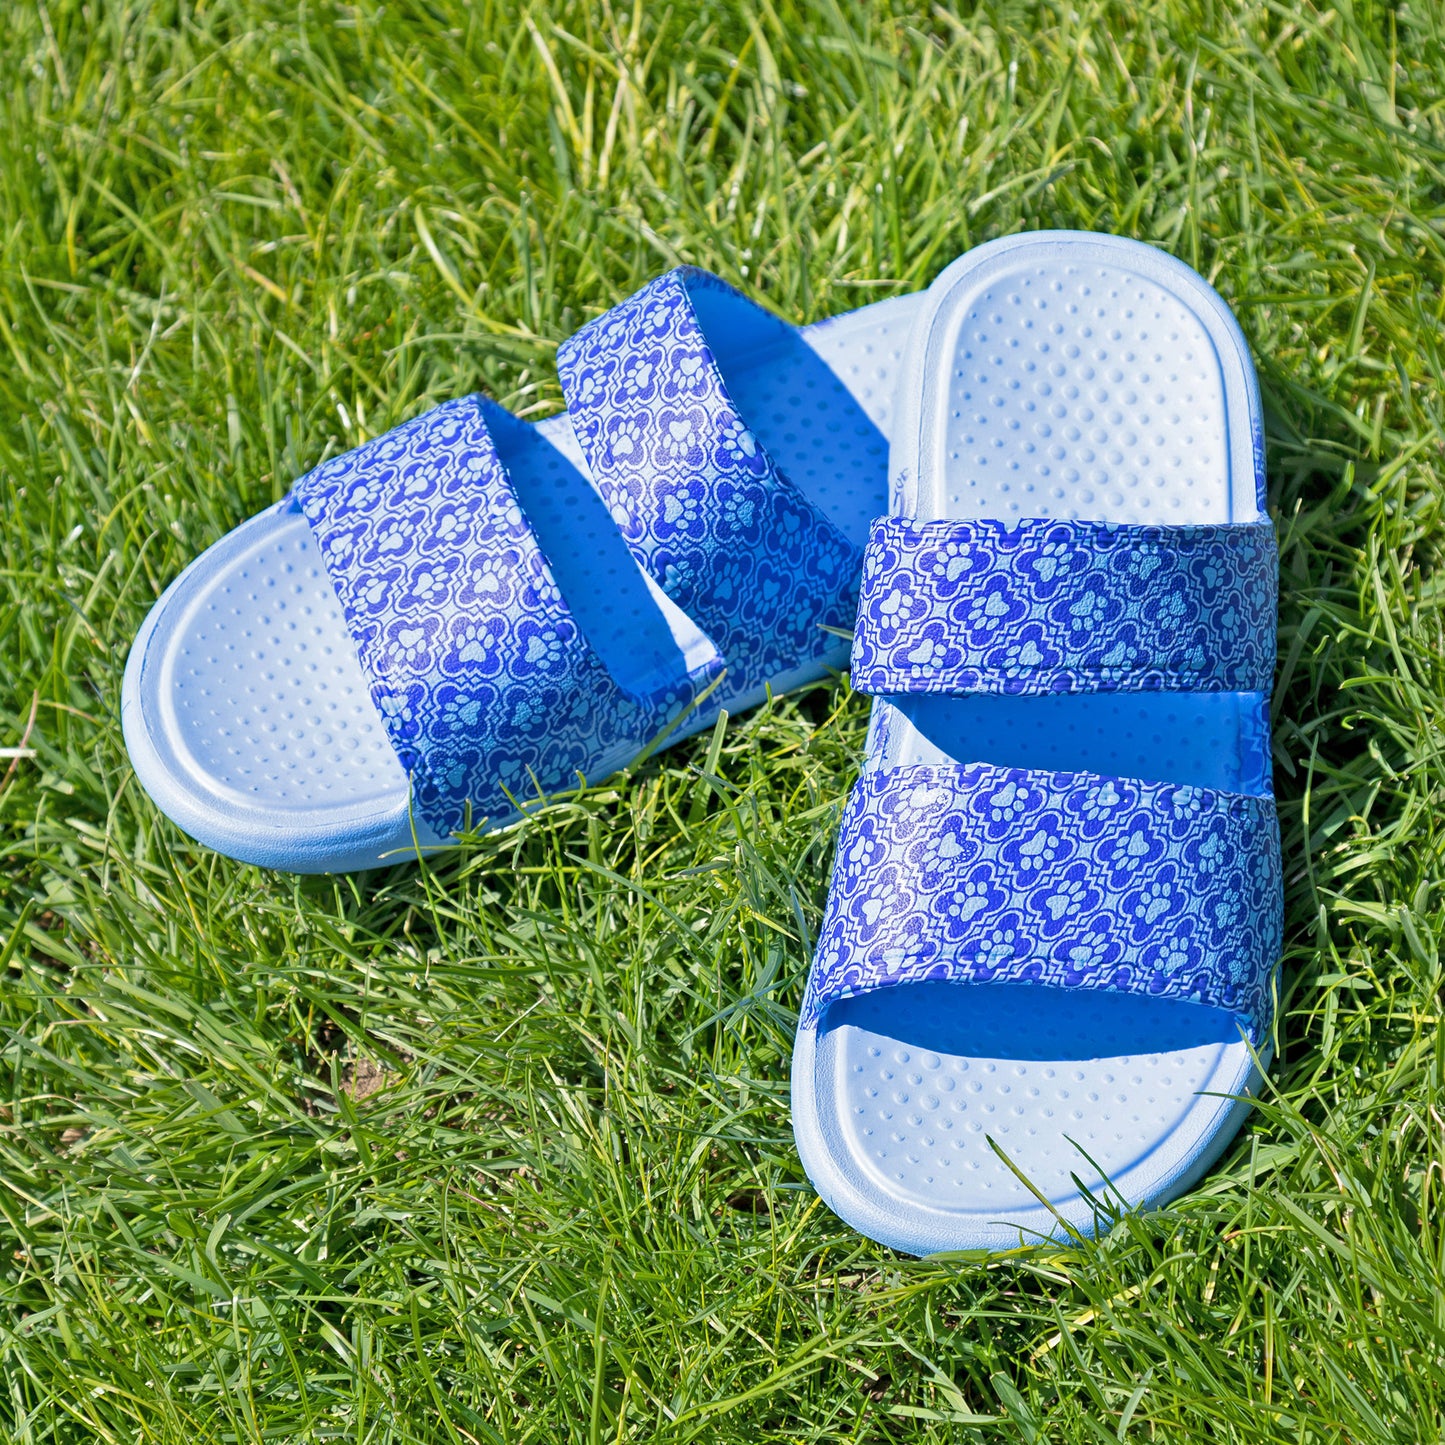 Two Strap Paw Slide Sandals